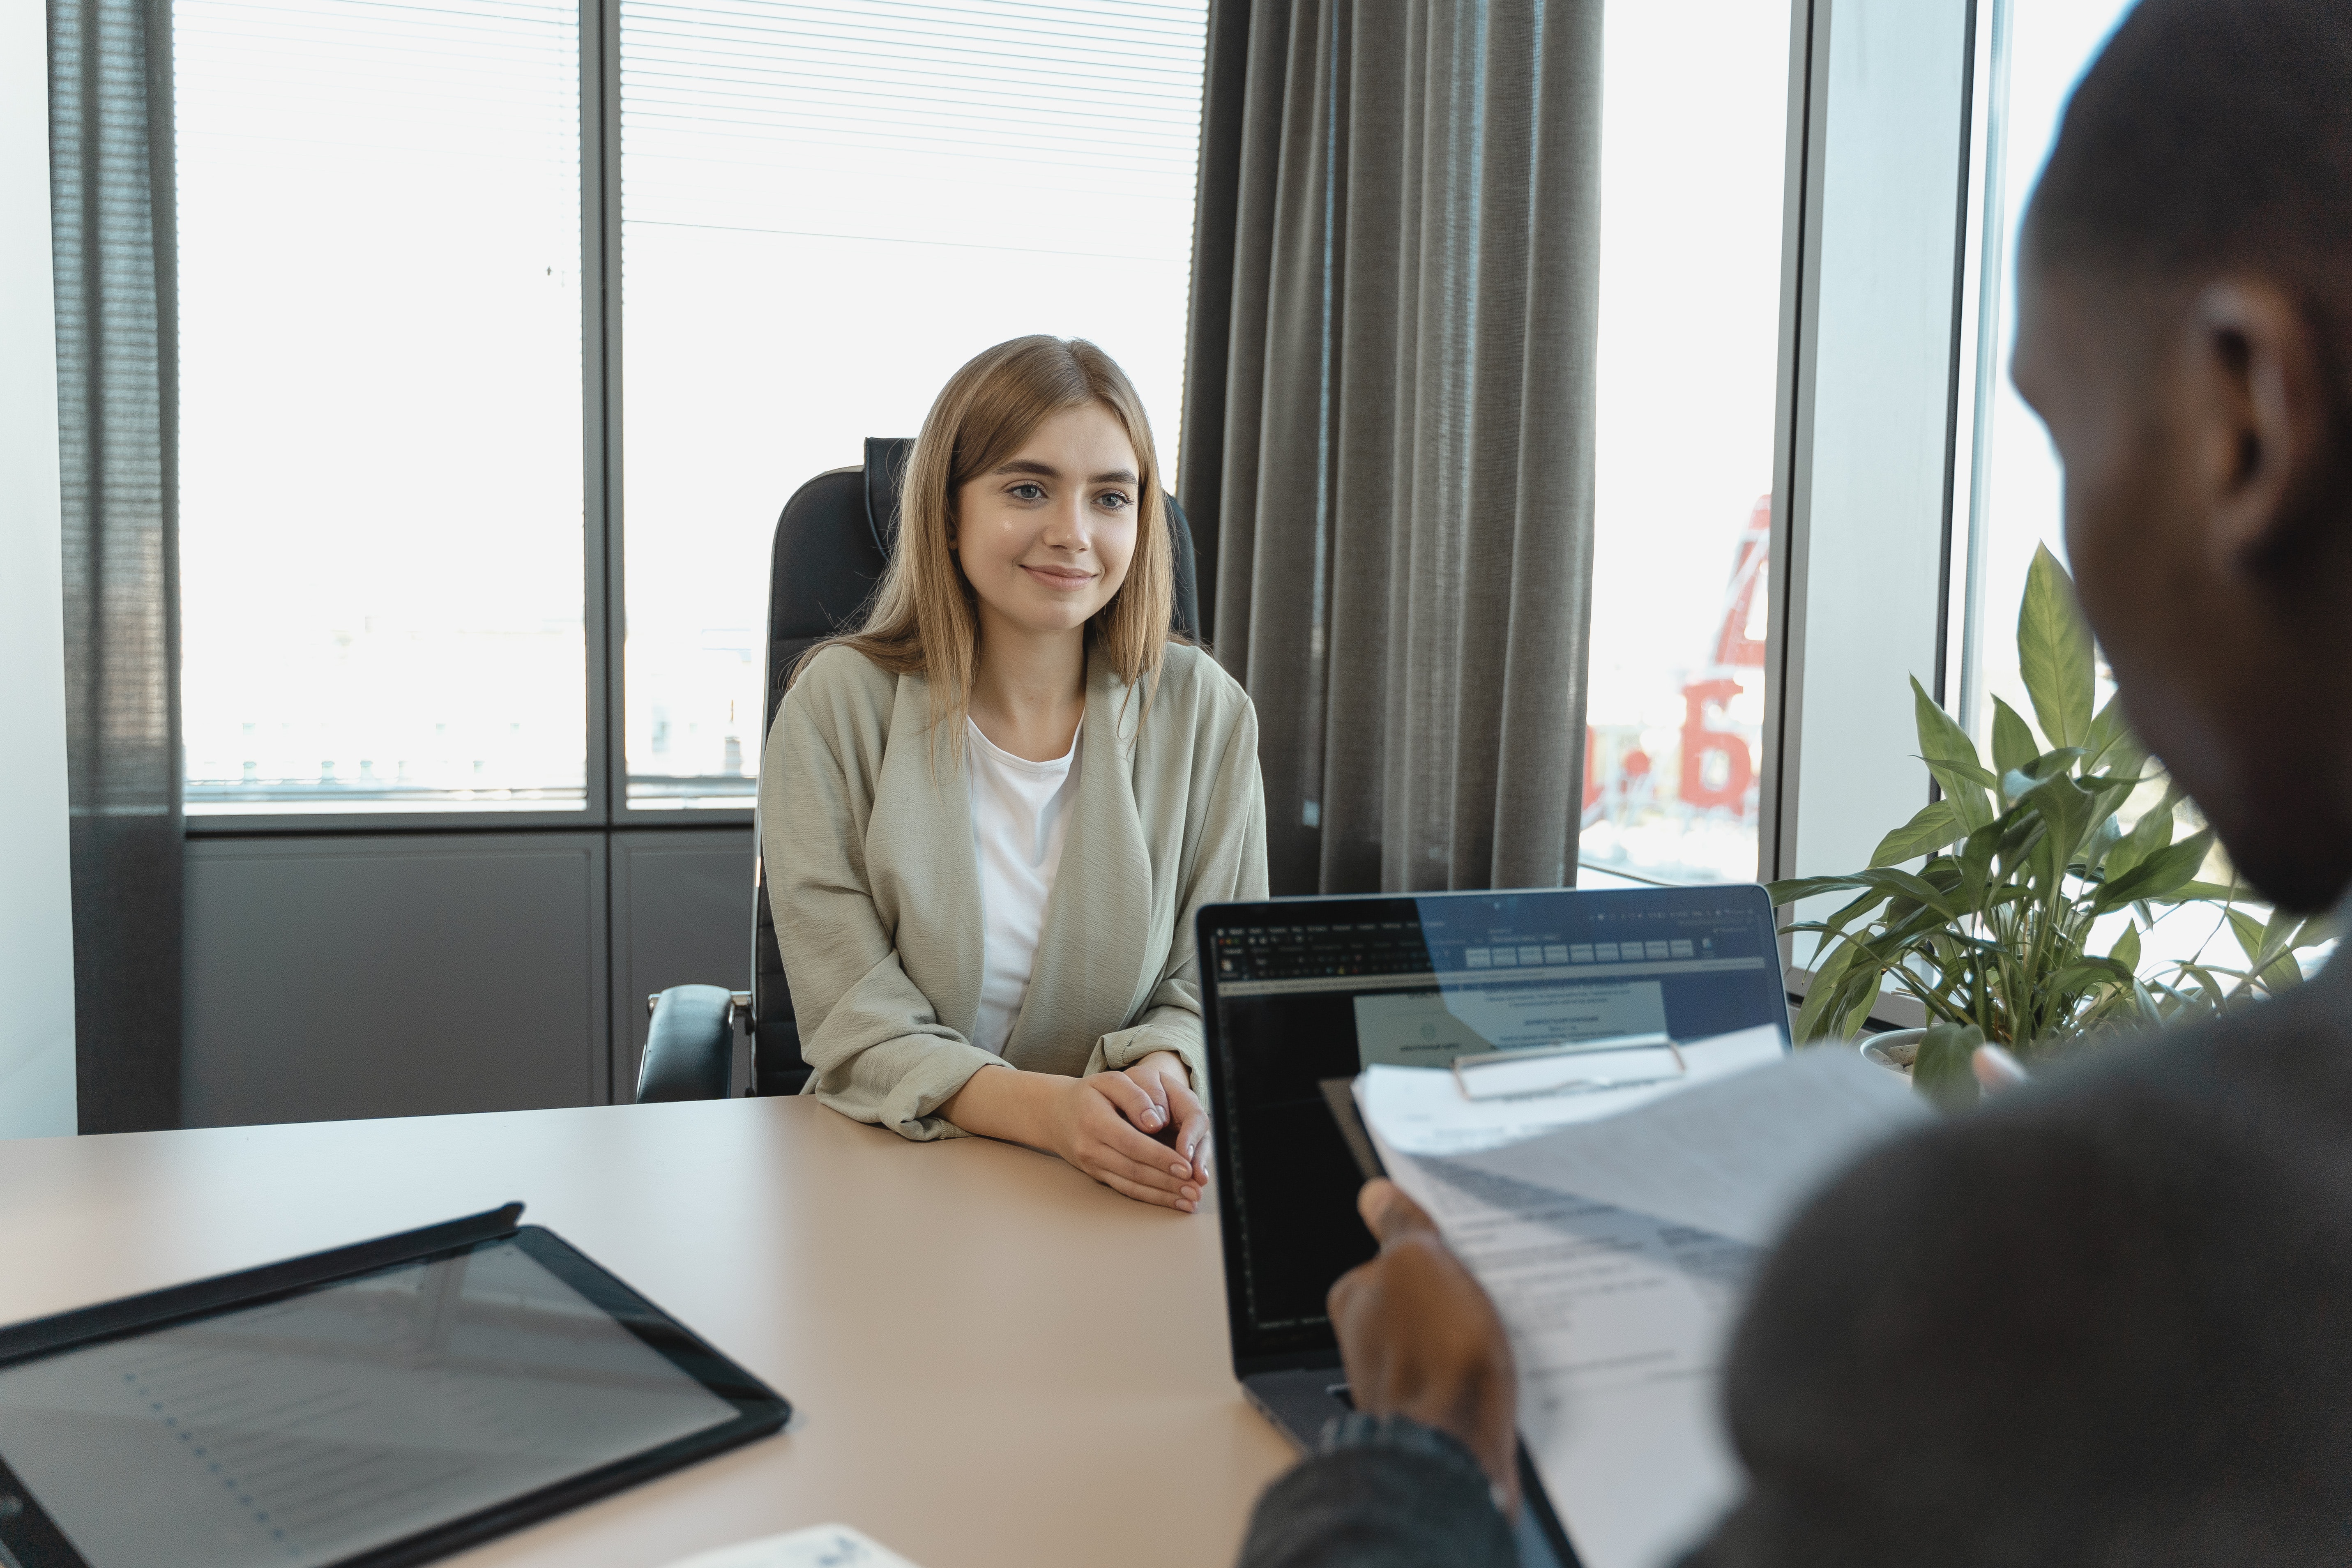  10 IMPORTANT POINTS TO KEEP IN MIND BEFORE ATTENDING ANY TECHNICAL INTERVIEWS